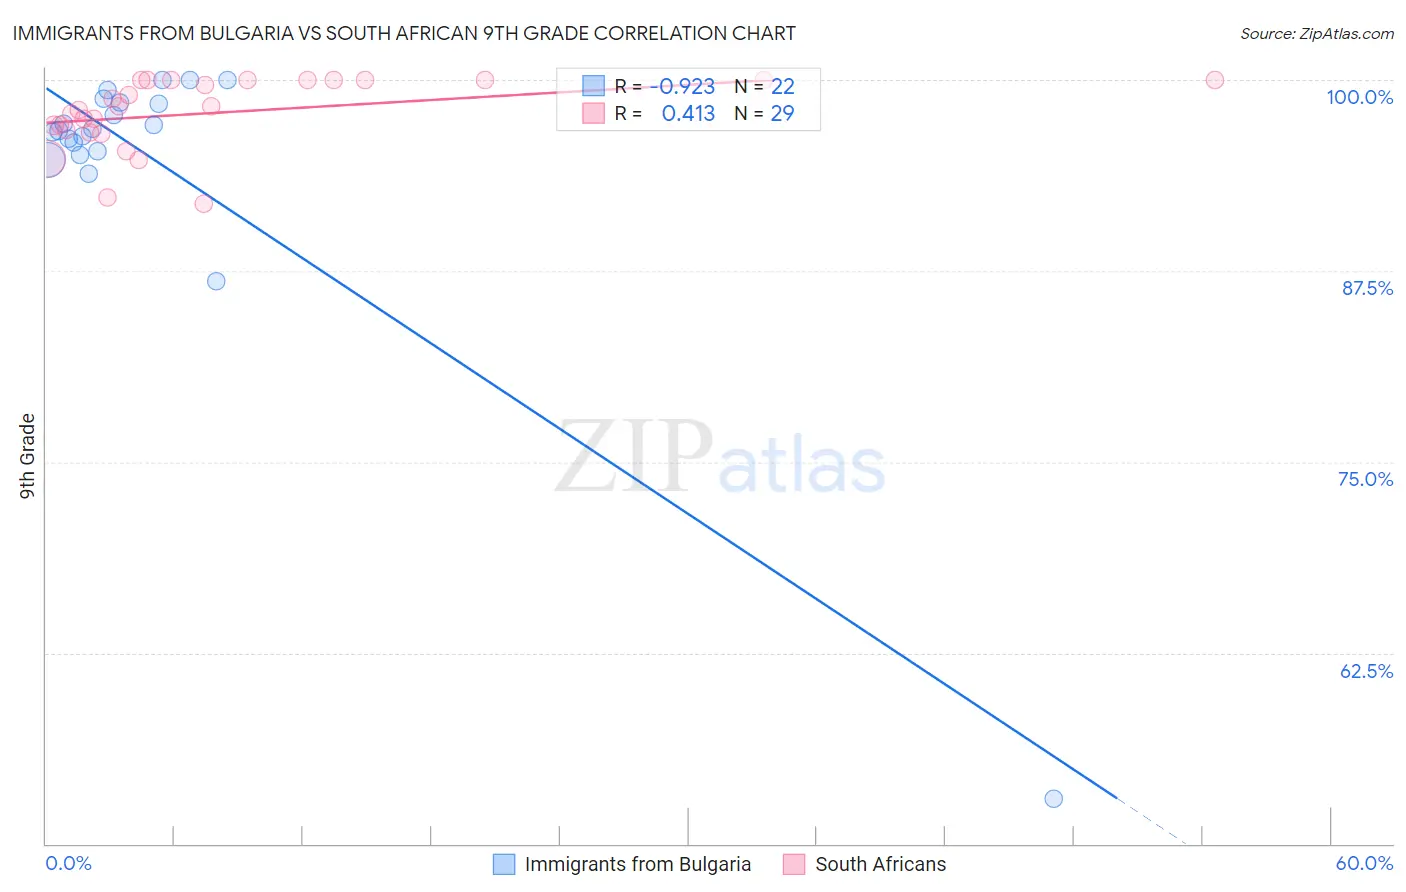 Immigrants from Bulgaria vs South African 9th Grade